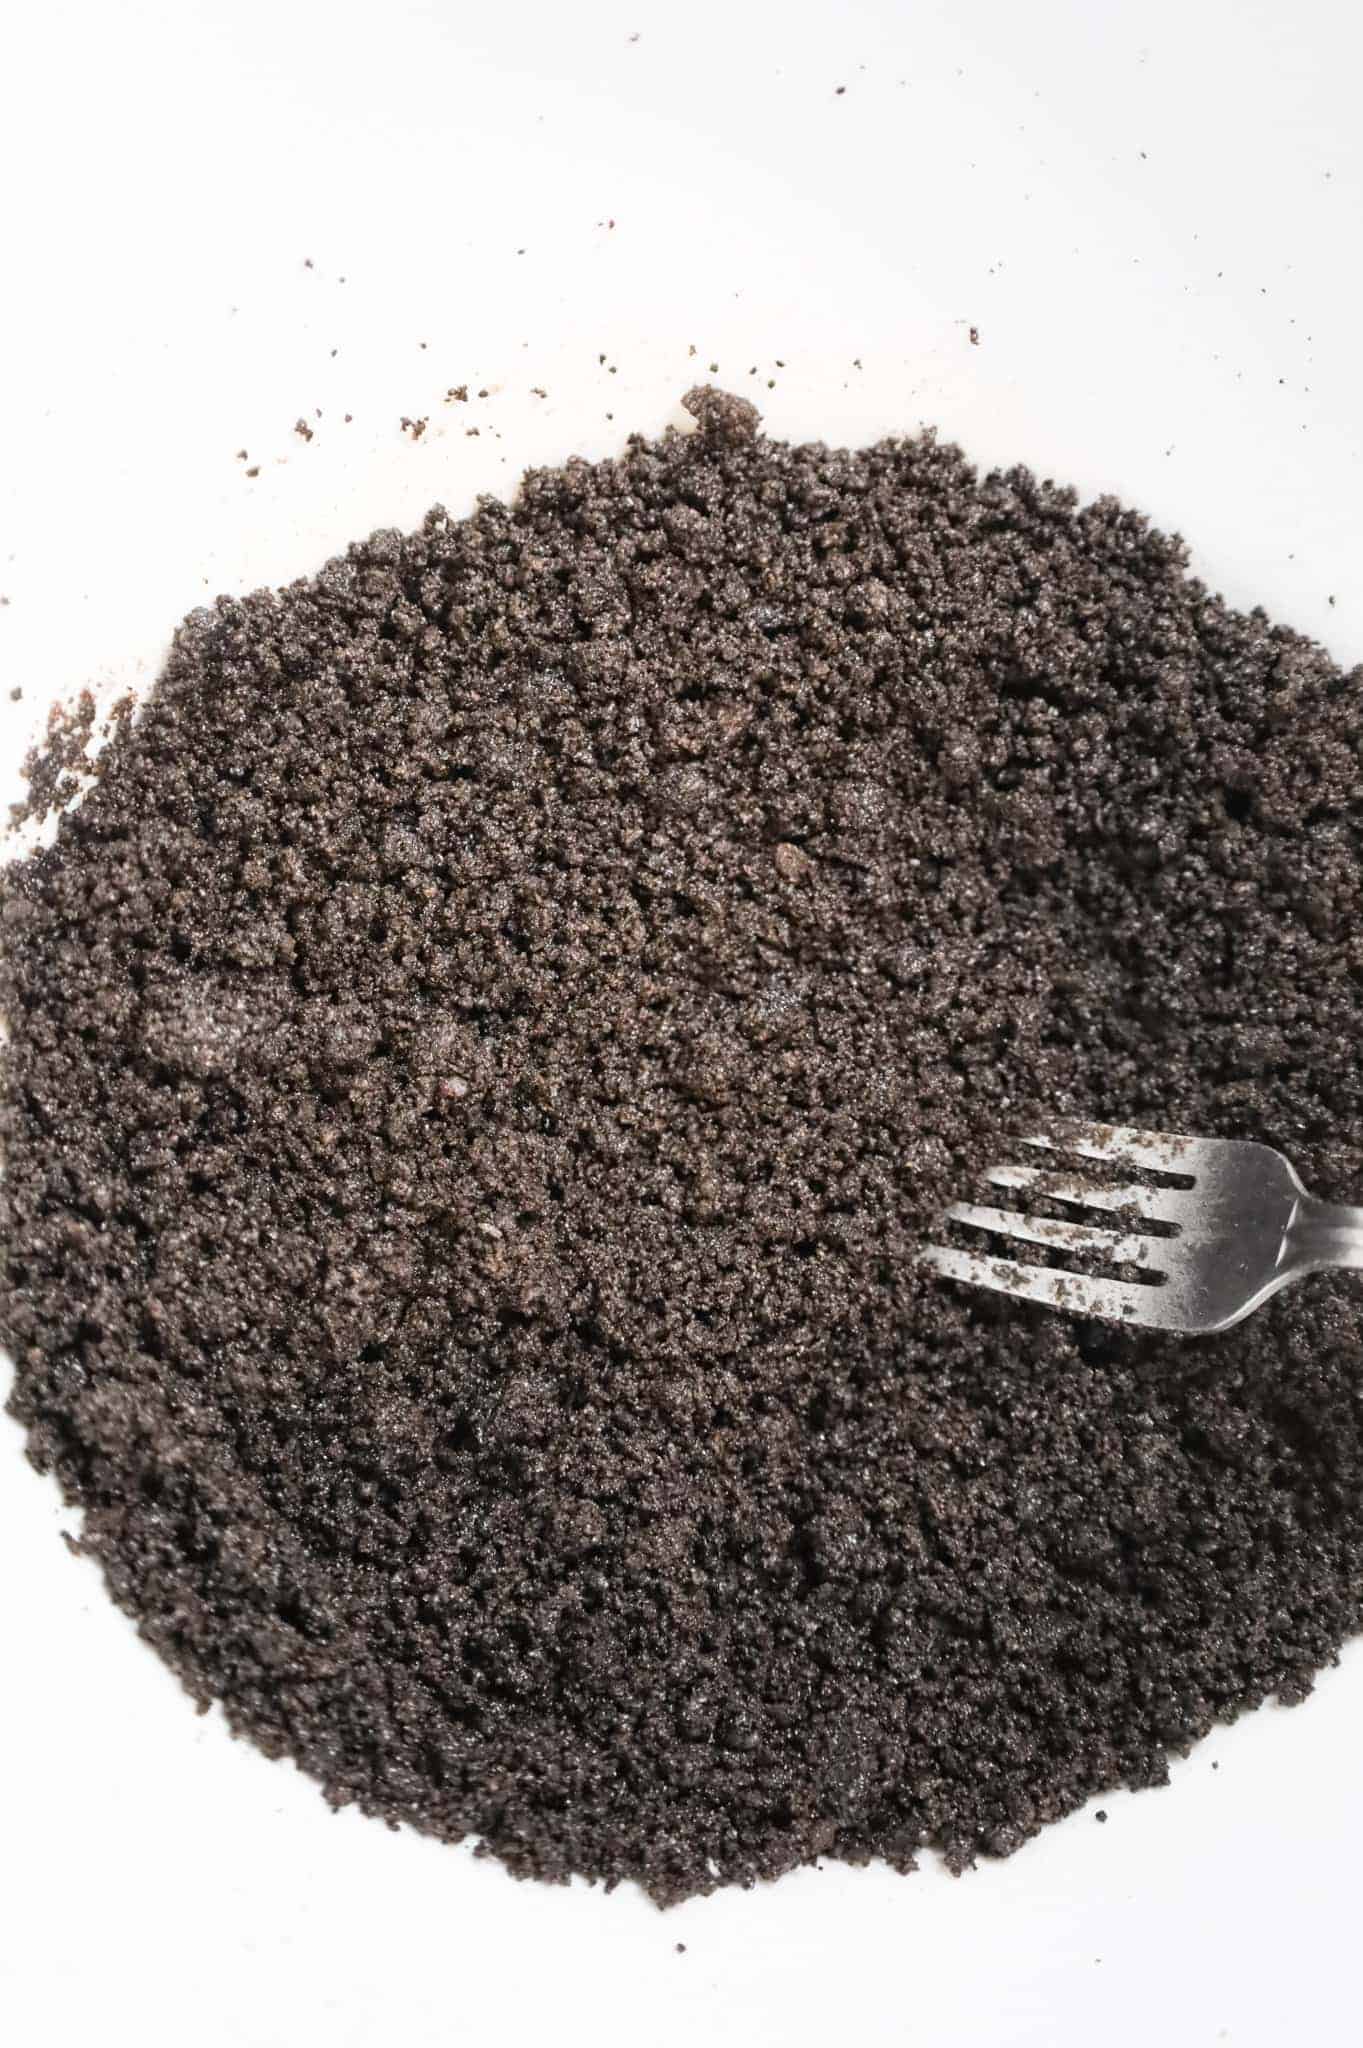 oreo crumb and melted butter mixture in a mixing bowl